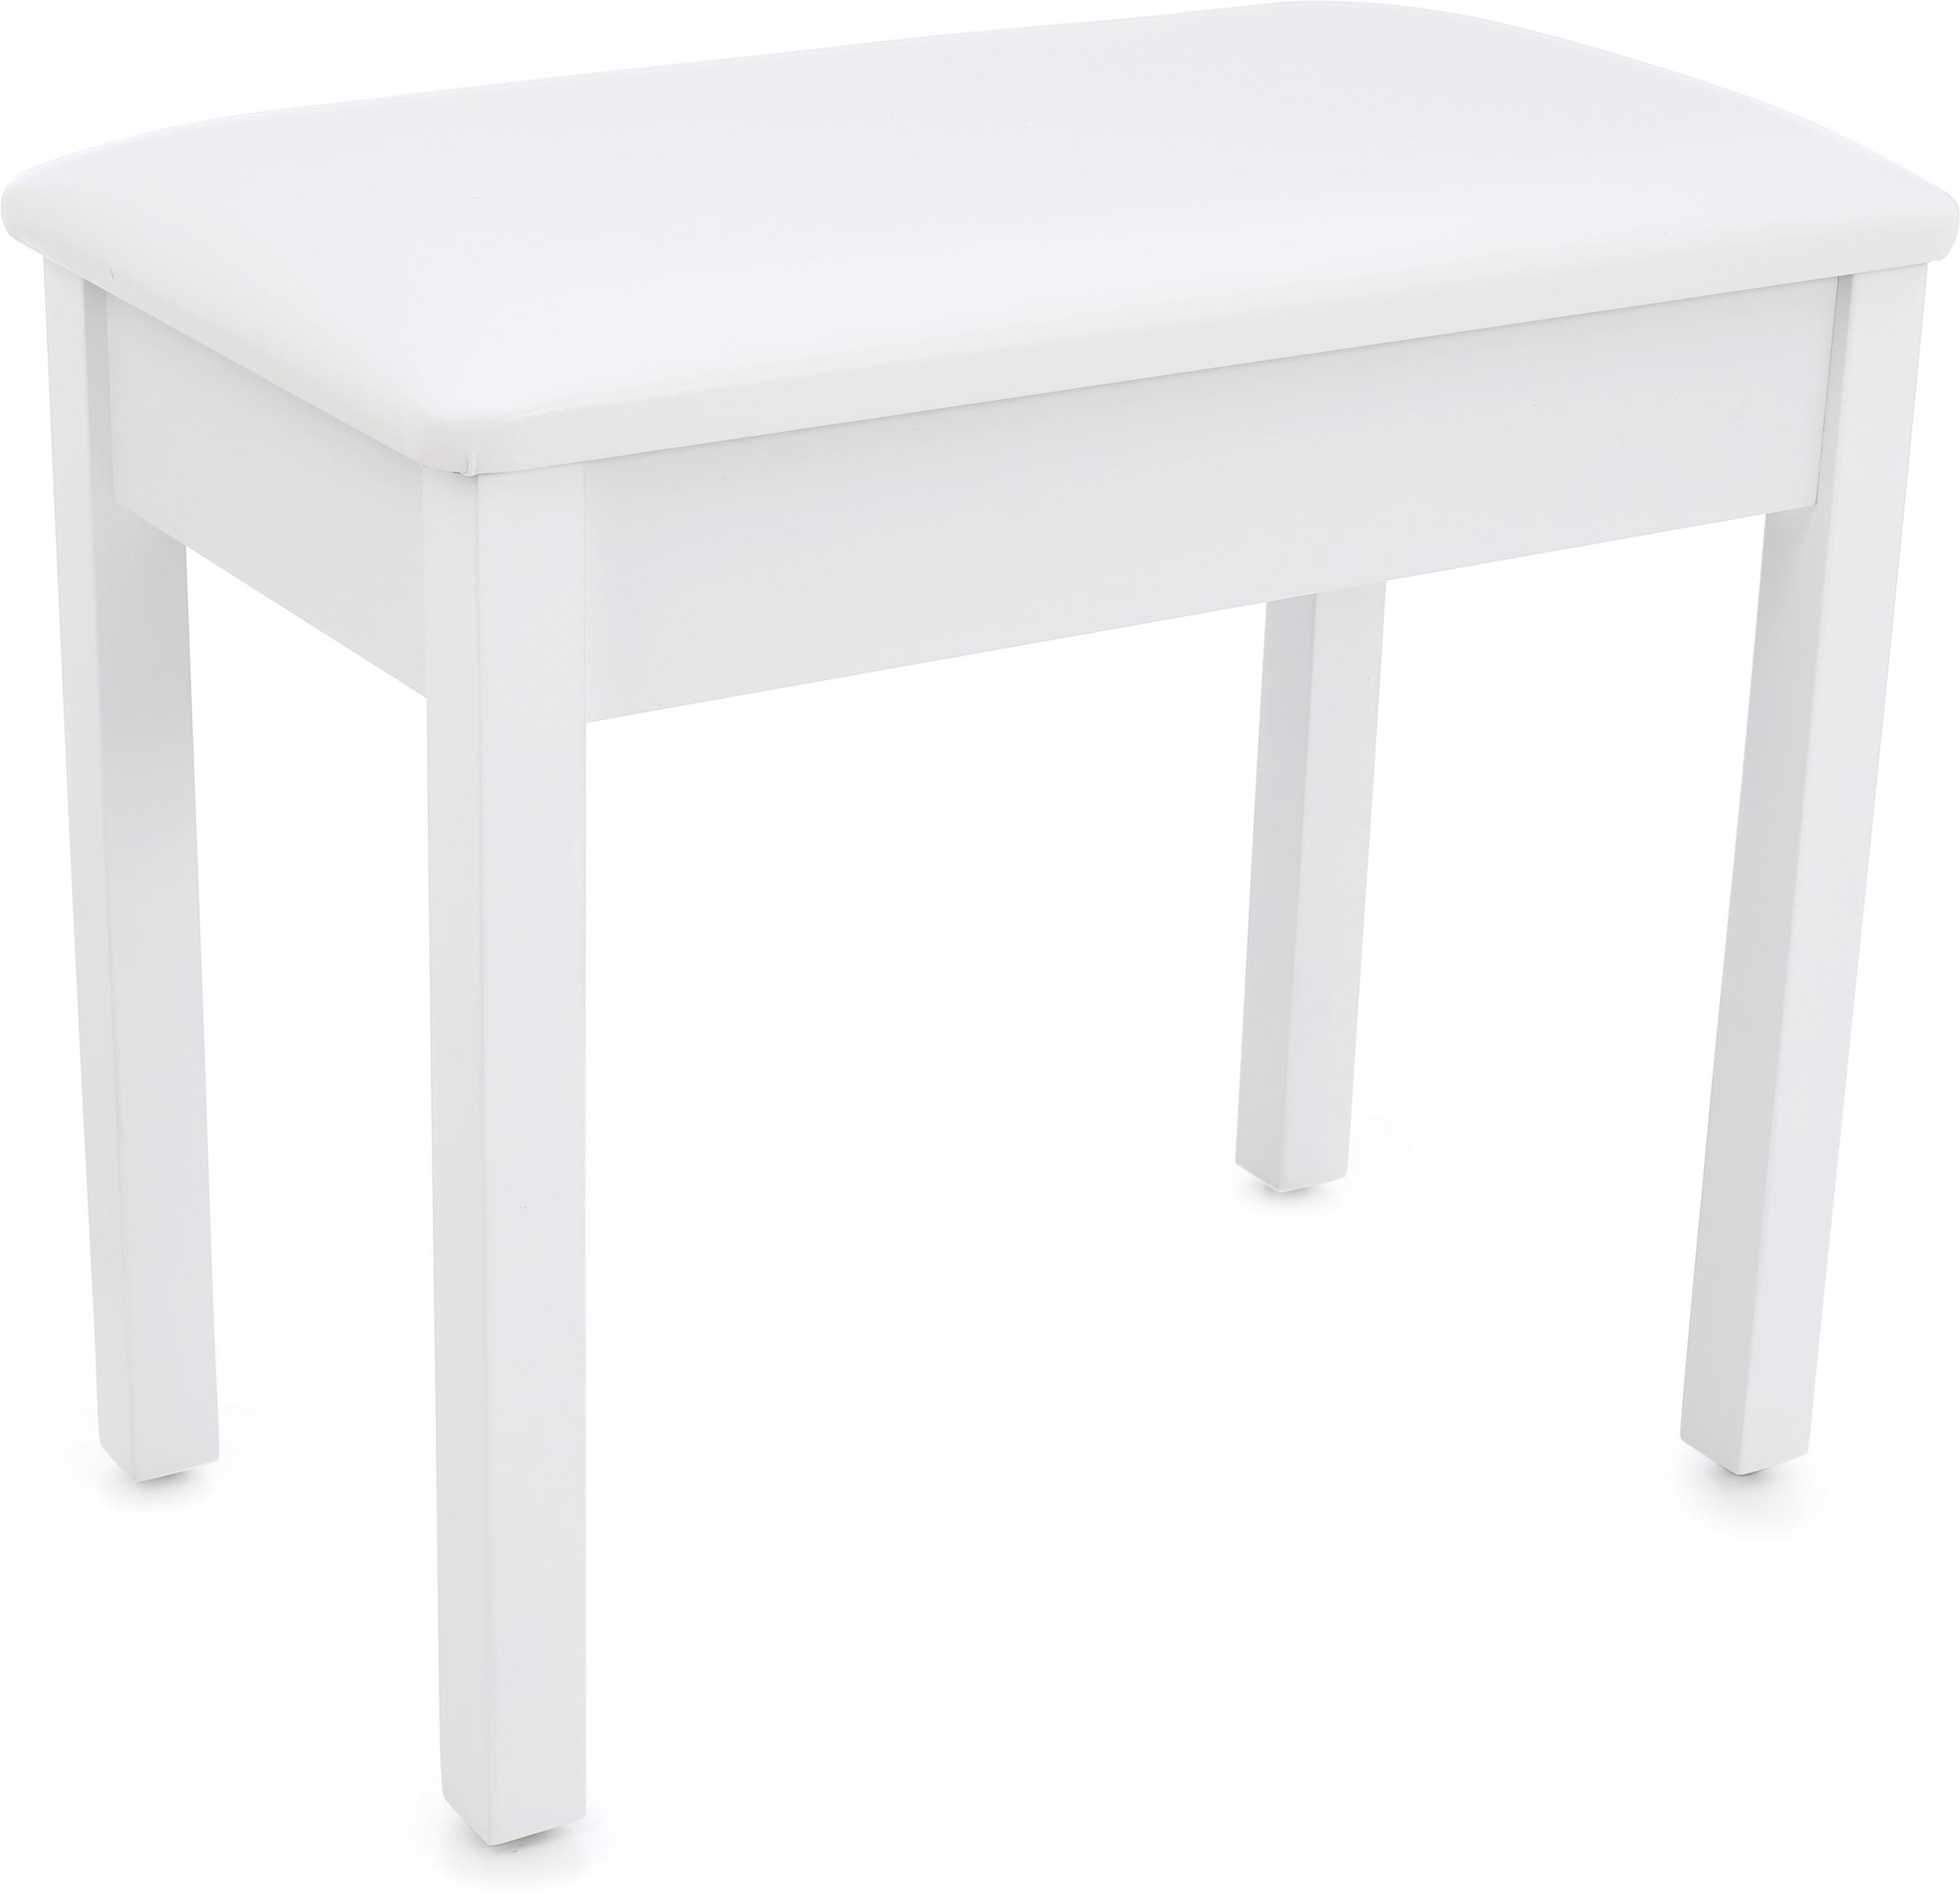 On-Stage KB8802W Keyboard/Piano Bench - White | Sweetwater